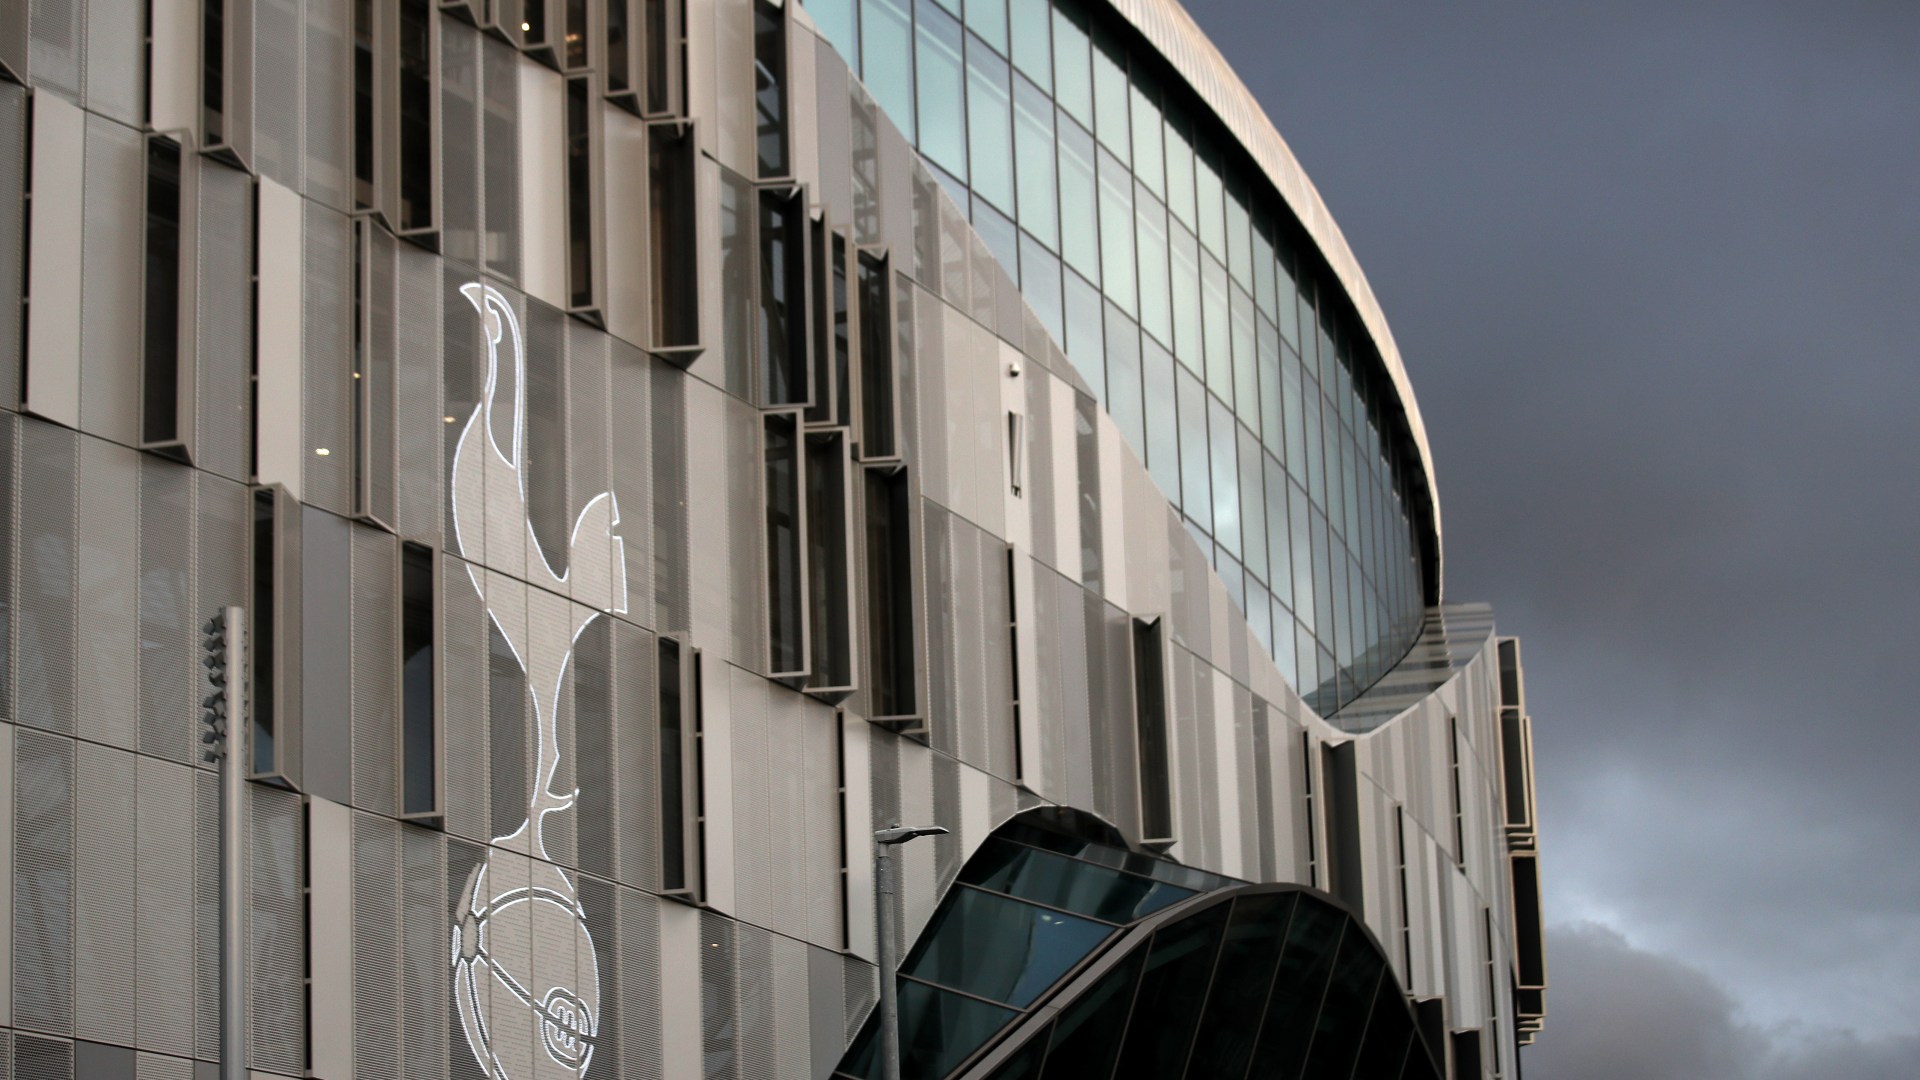 Tottenham Hotspur Stadium vandalised before NFL game with damage costs expected to hit six figures